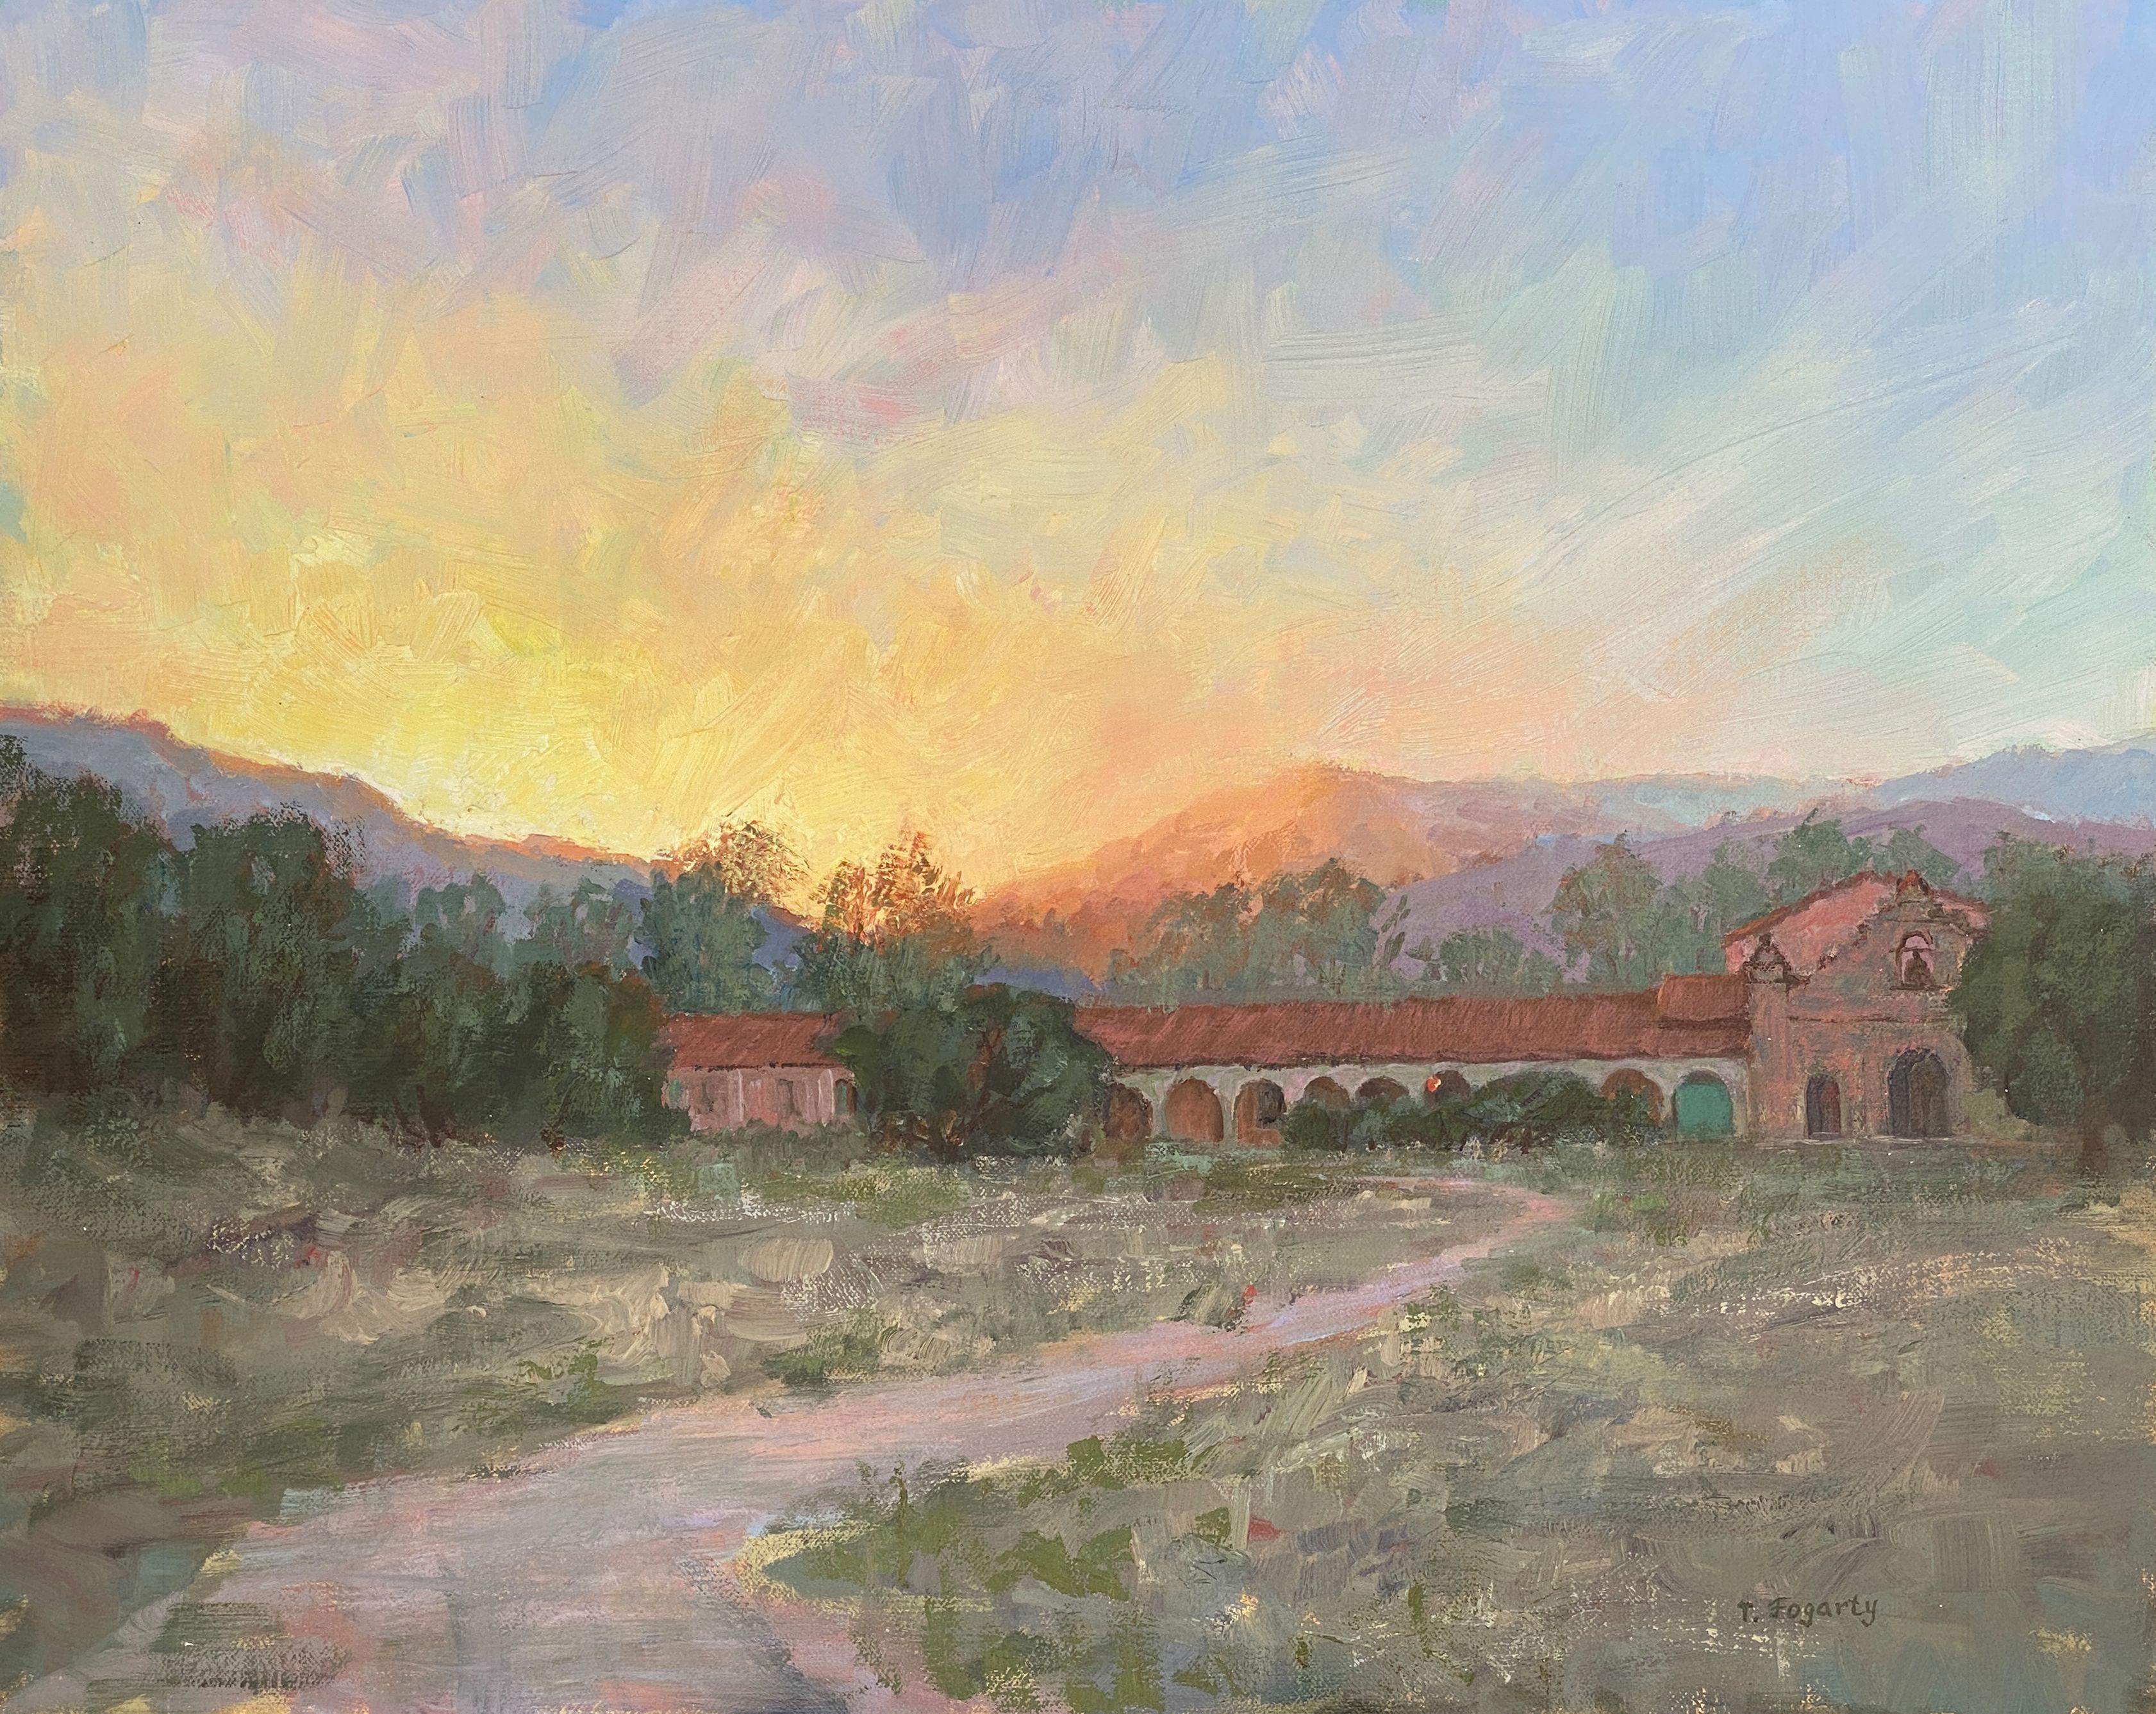 Tatyana Fogarty Landscape Painting - Mission Road Sunset, Painting, Oil on Canvas